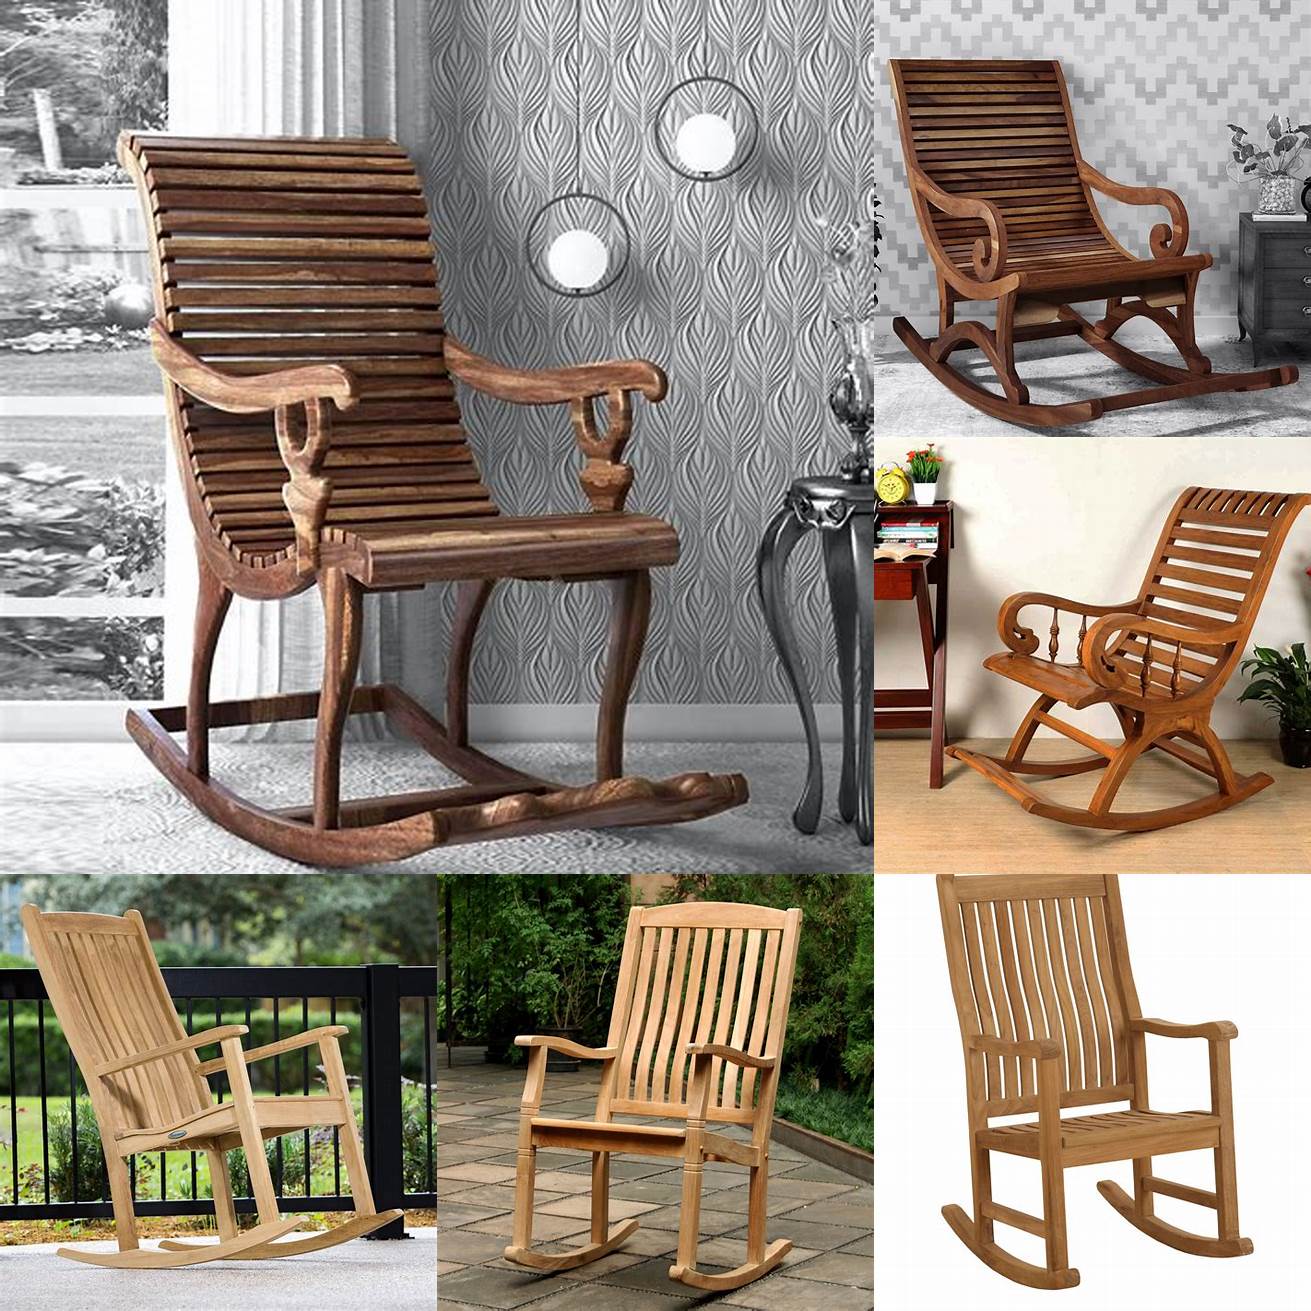 A picture of a teak rocking chair with strong solid construction